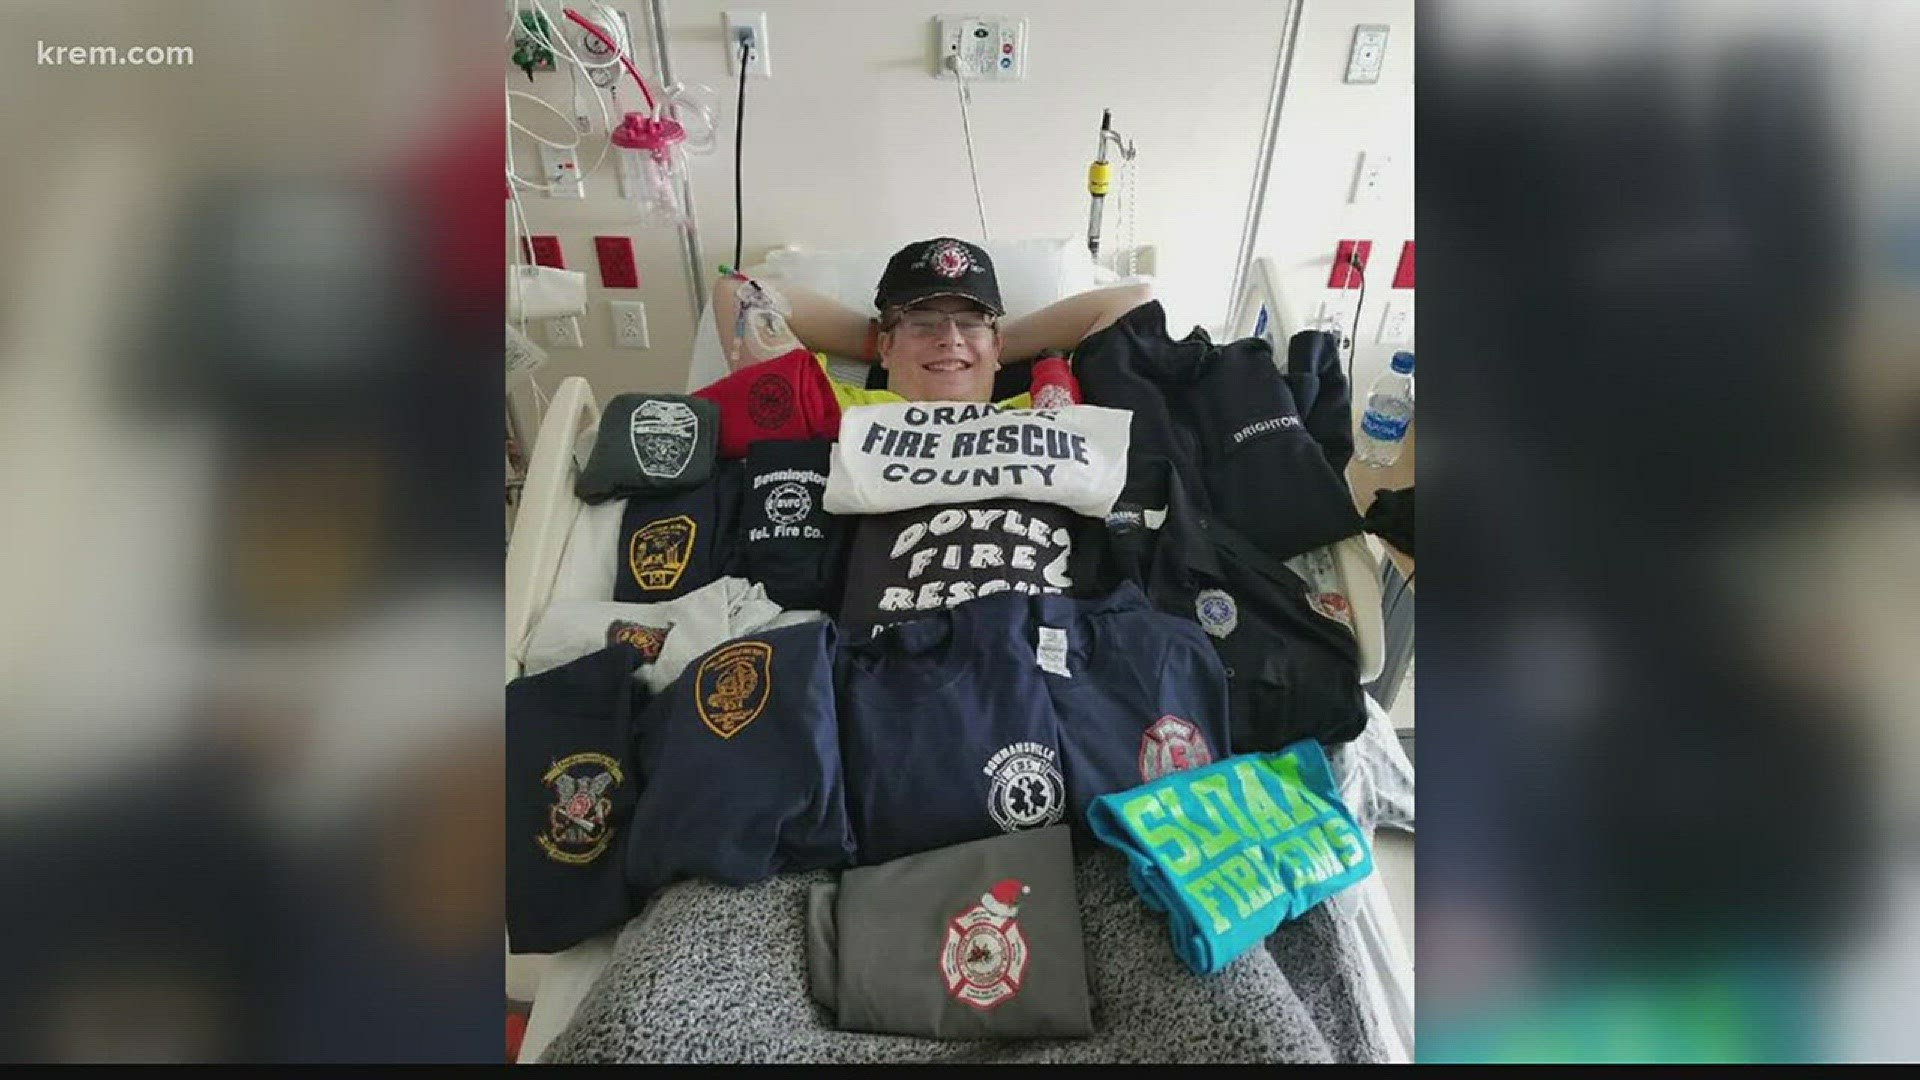 KREM 2's Danamarie McNicholl shows how firefighters across the country are showing their support for a New York boy battling Leukemia.